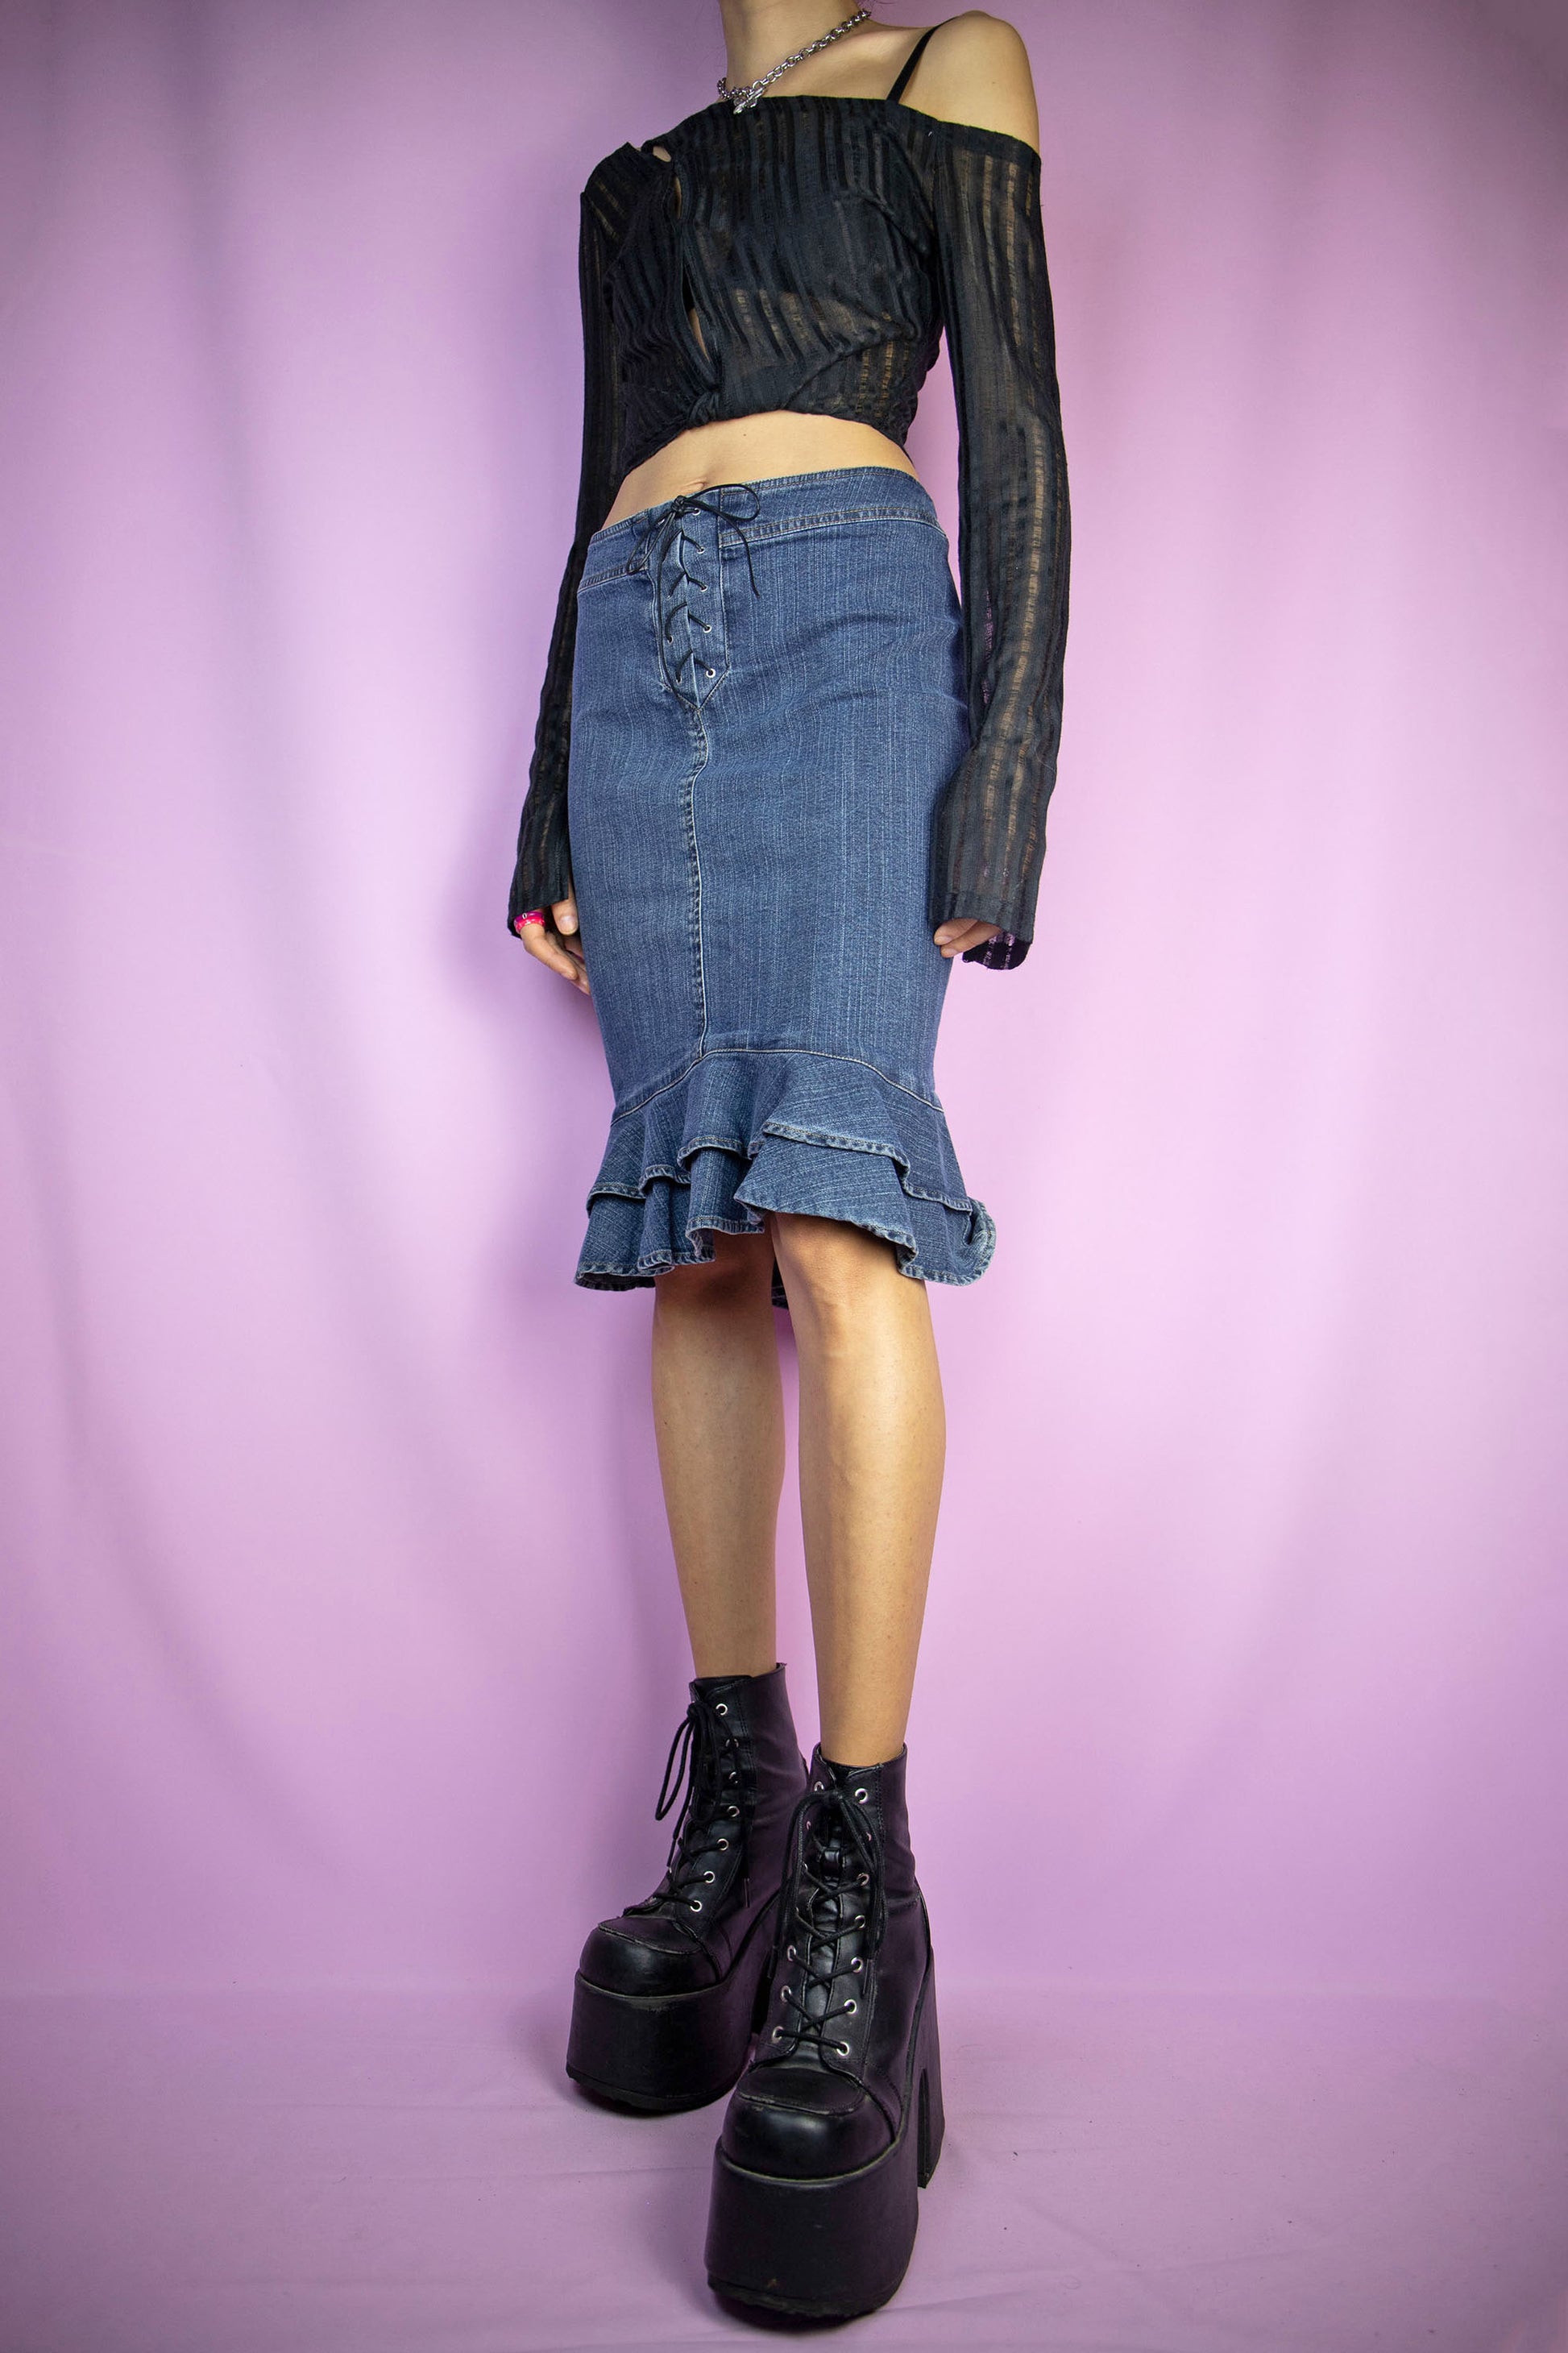 The Vintage Y2K Ruffle Hem Denim Skirt is a sleek dark denim trumpet skirt with a charming ruffled hem, back zipper closure, and lace-up tie front. This iconic cyber pencil jean mini skirt captures the essence of 2000s fashion.